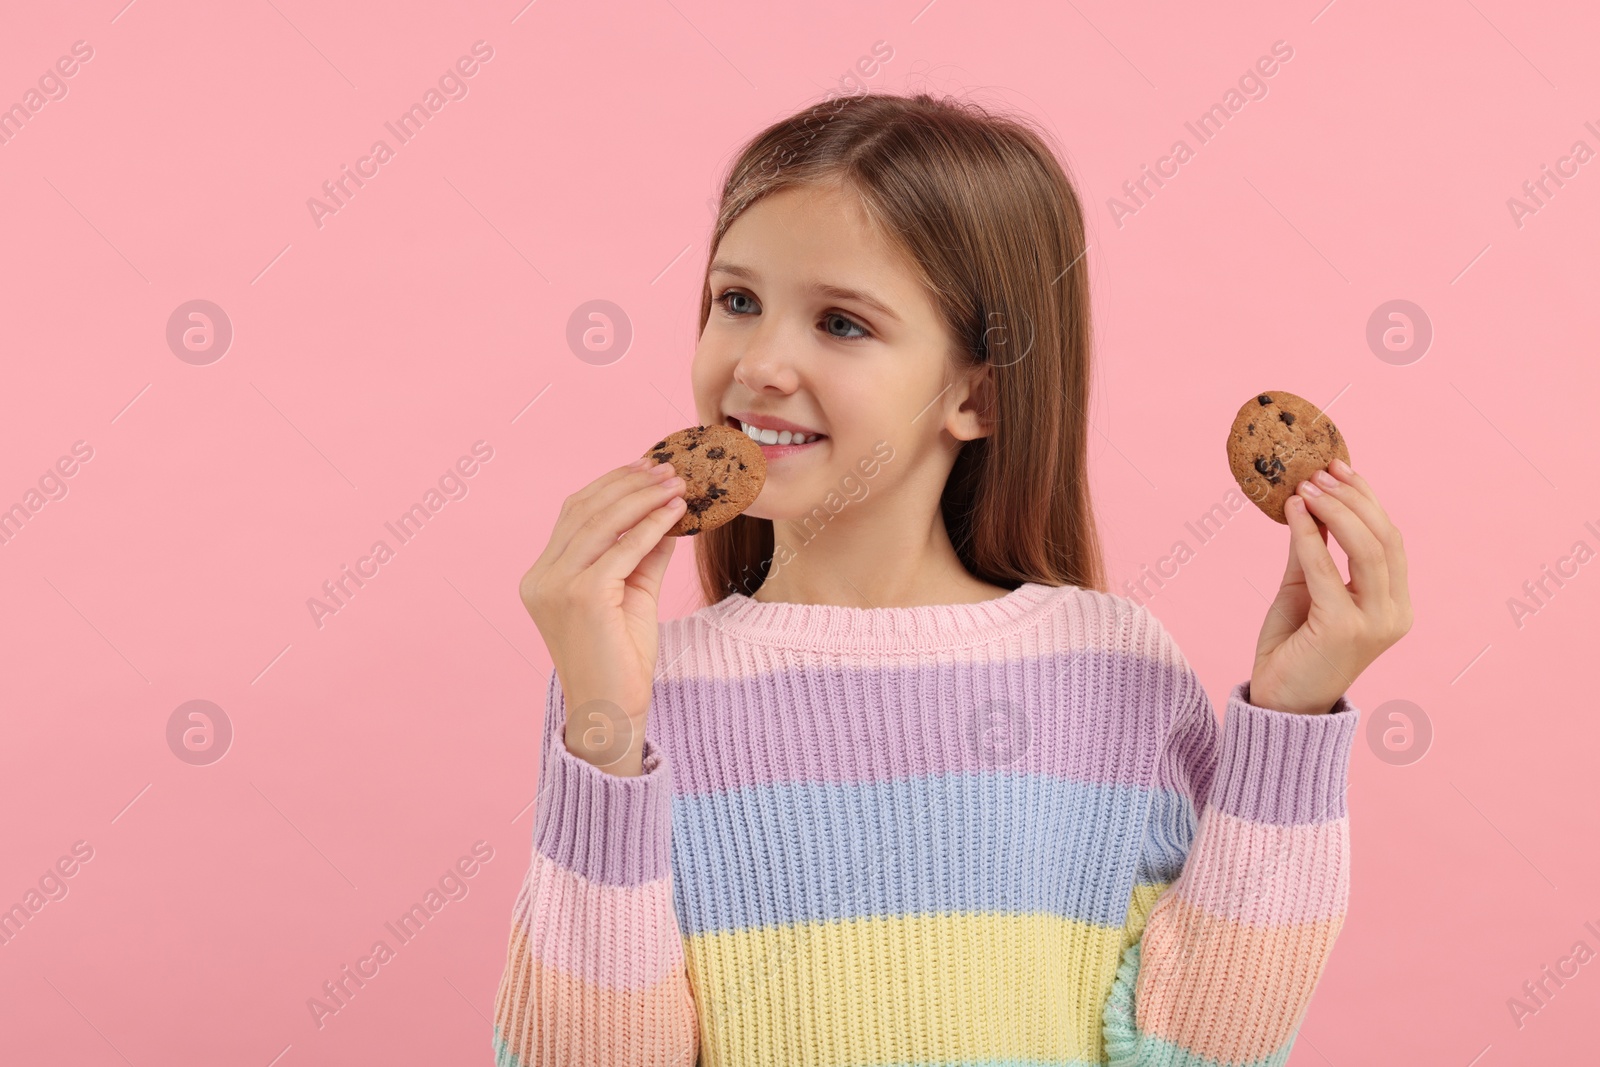 Photo of Cute girl with chocolate chip cookies on pink background